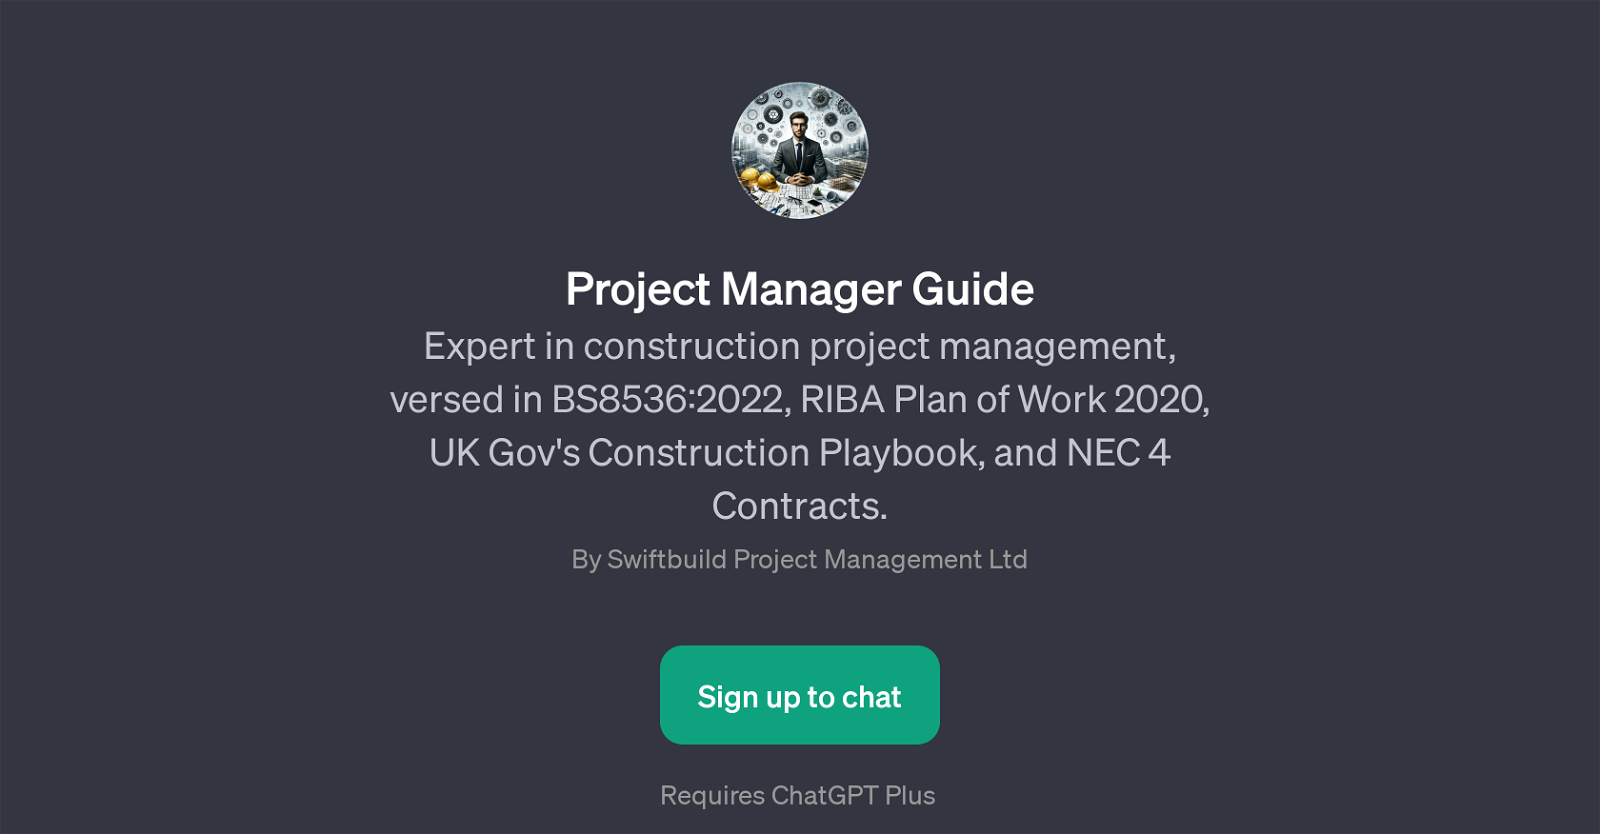 Project Manager Guide website